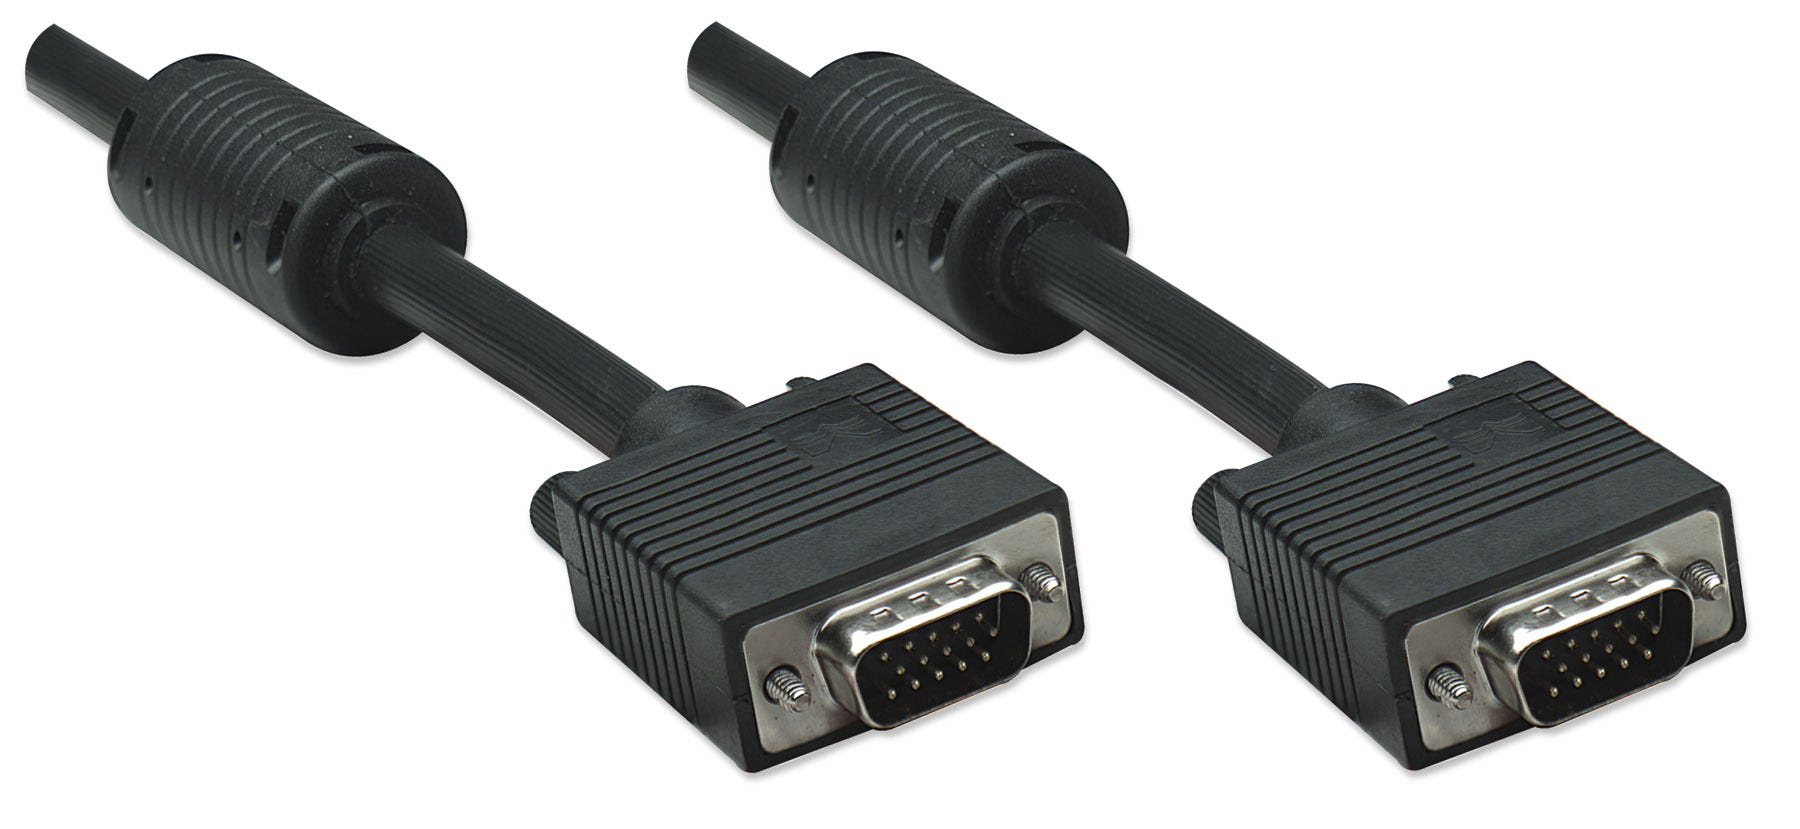 Manhattan VGA Monitor Cable (with Ferrite Cores), 15m, Black, Male to Male, HD15, Cable of higher SVGA Specification (fully compatible)